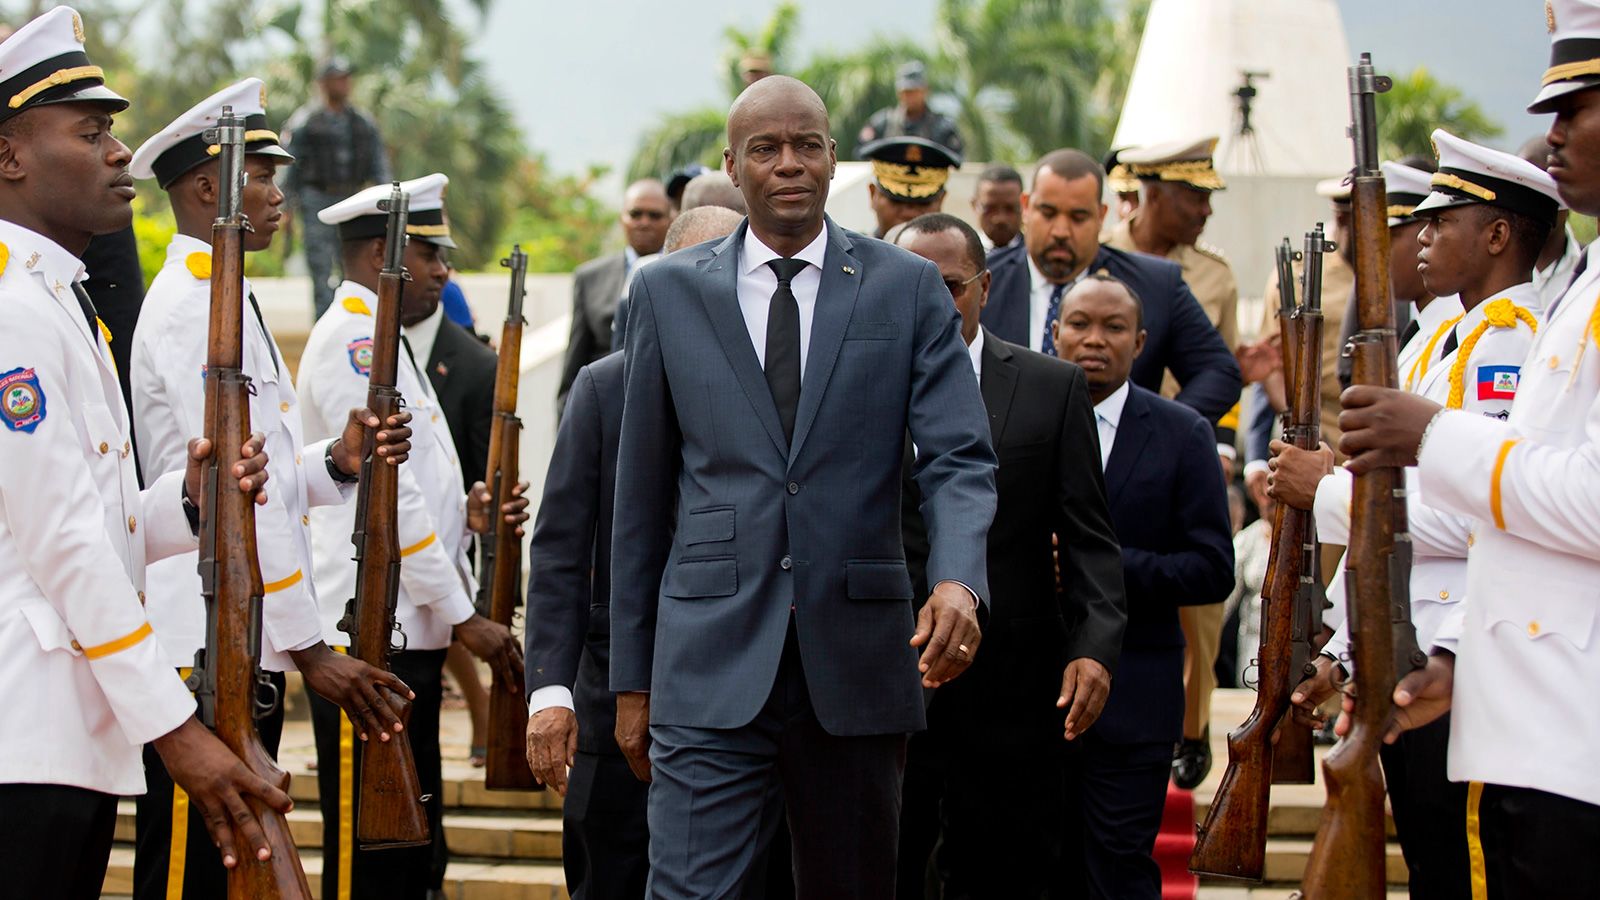 Haiti’s president is assassinated in his home